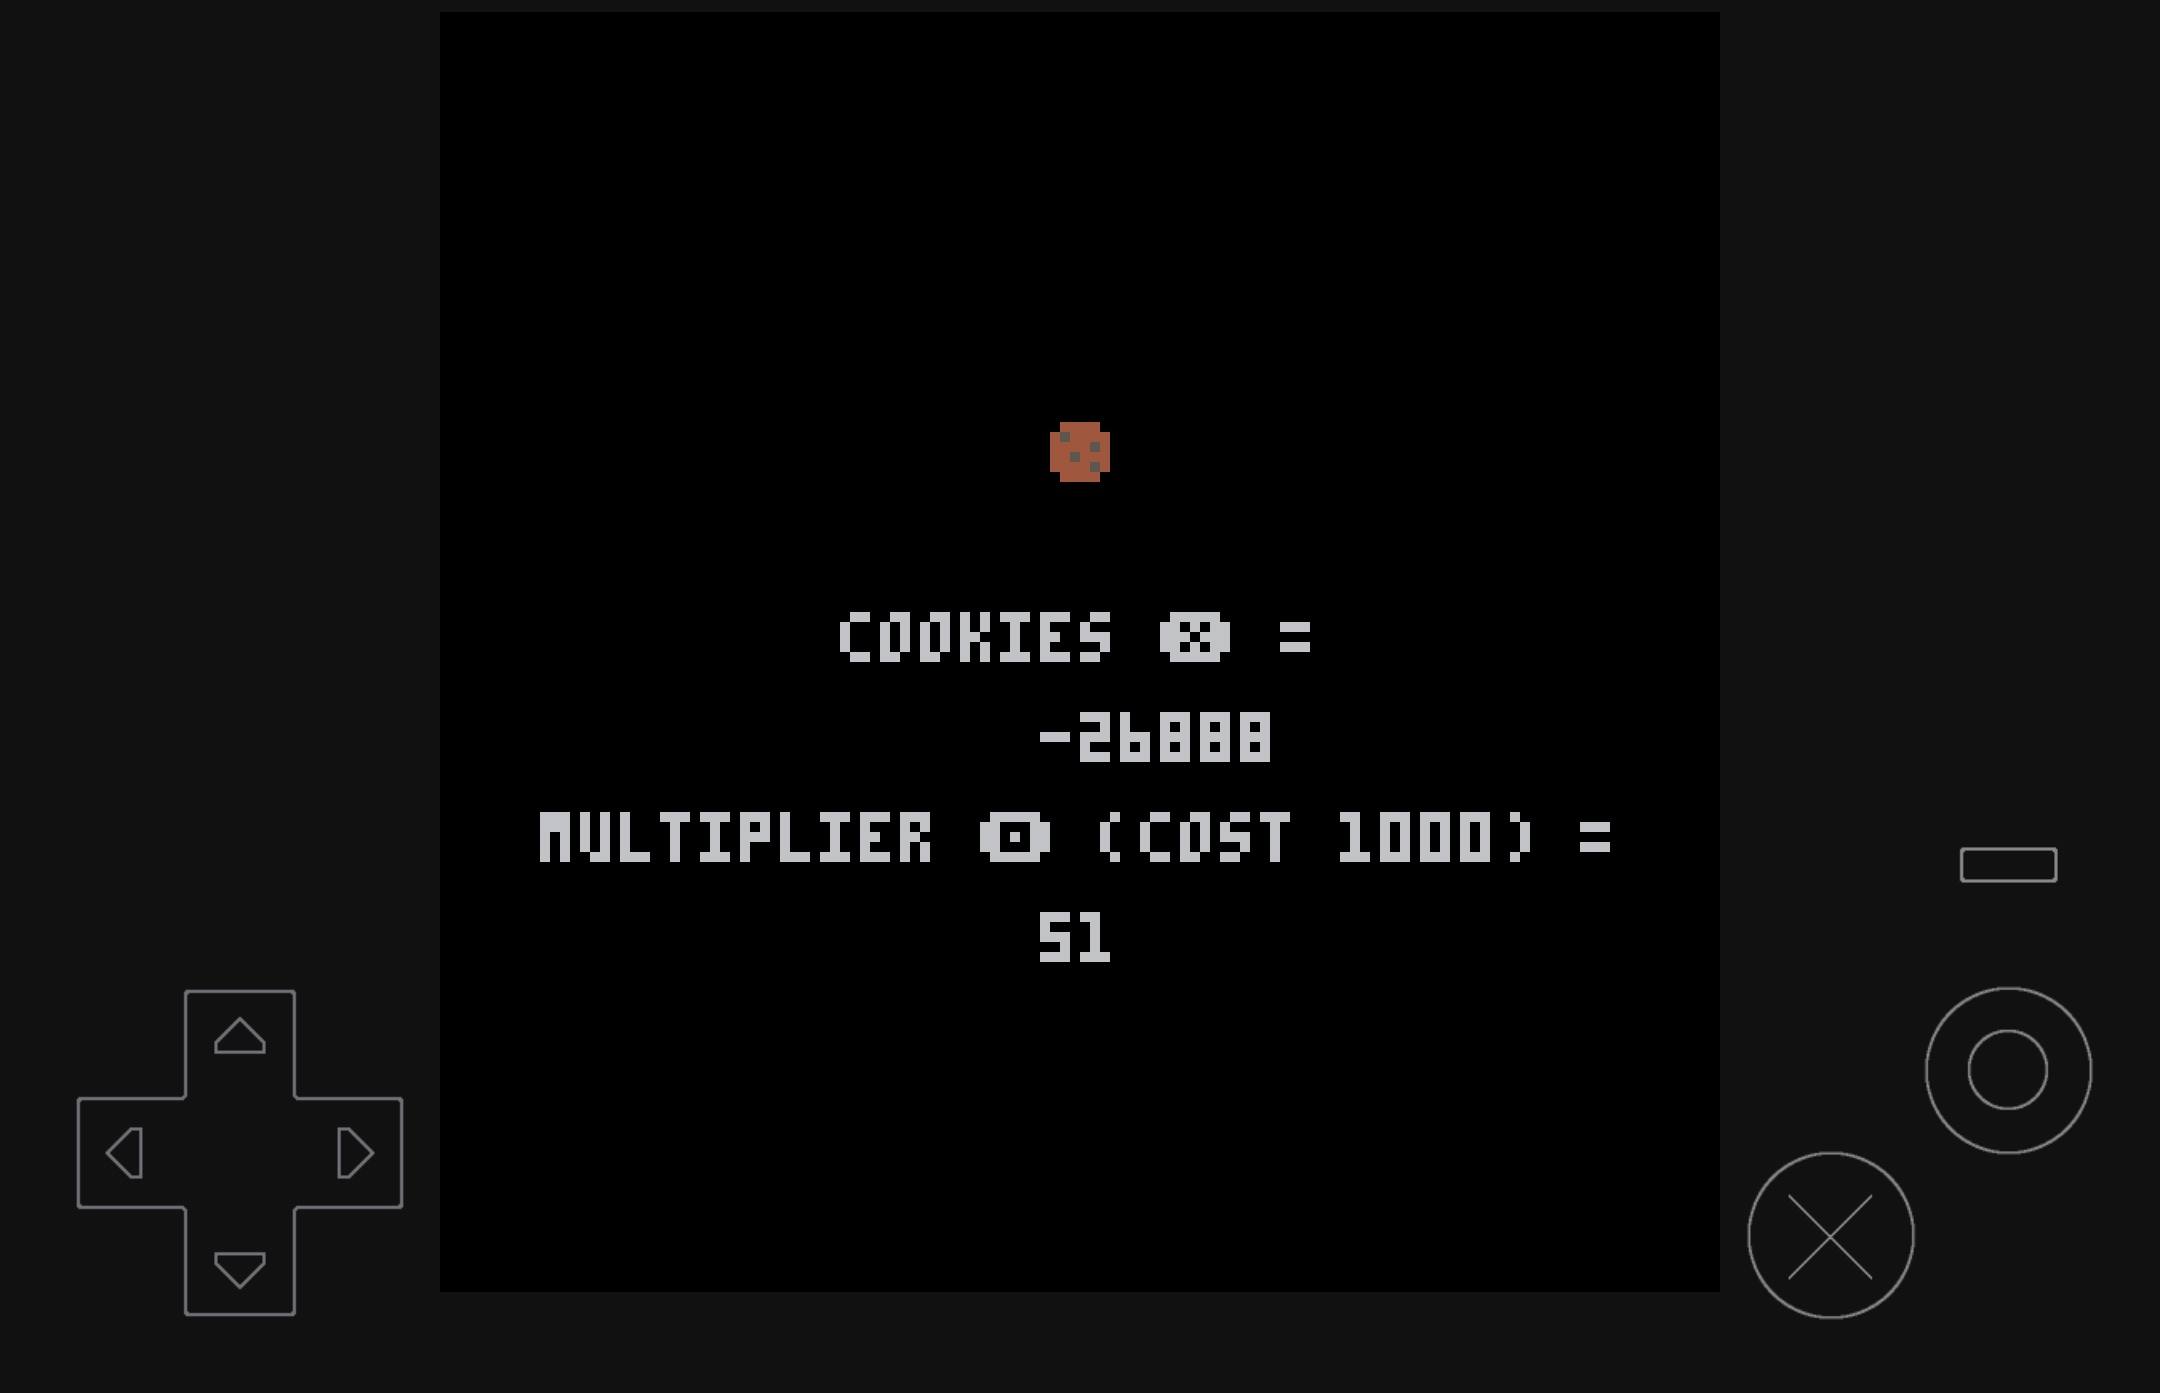 Cookie Clicker for NES